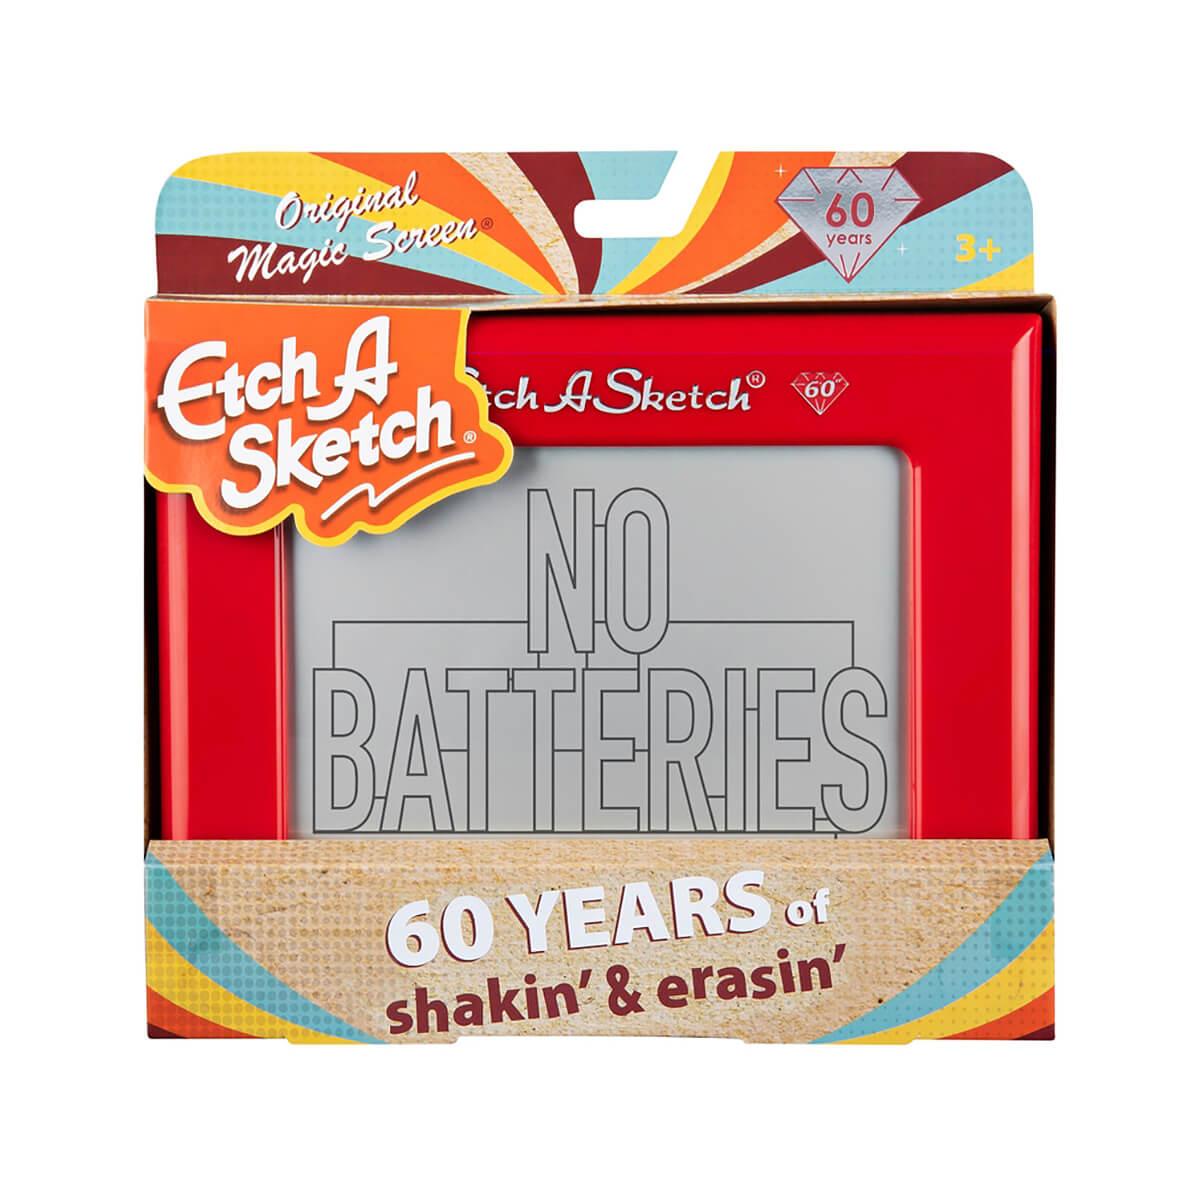  Classic 60 Years Etch A Sketch Toy